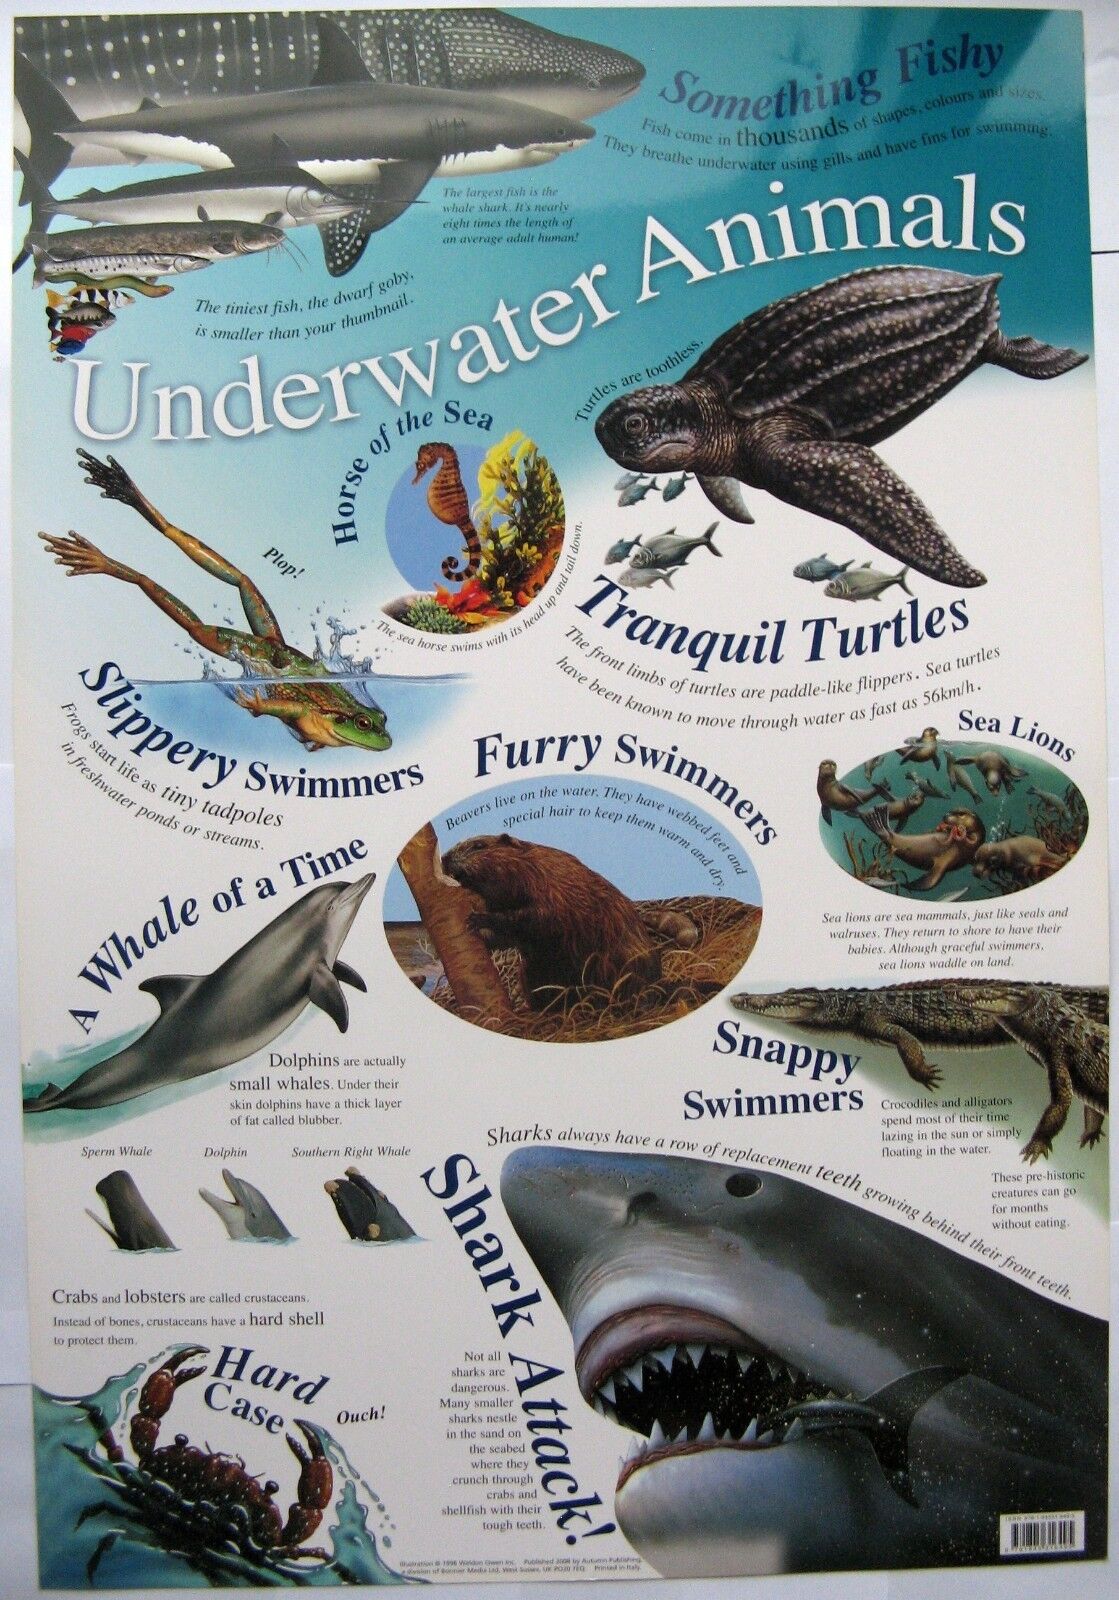 UNDERWATER ANIMALS POSTER WALL CHART BY AUTUMN PUBLISHING - 52cm x 76cm -  NEW | eBay